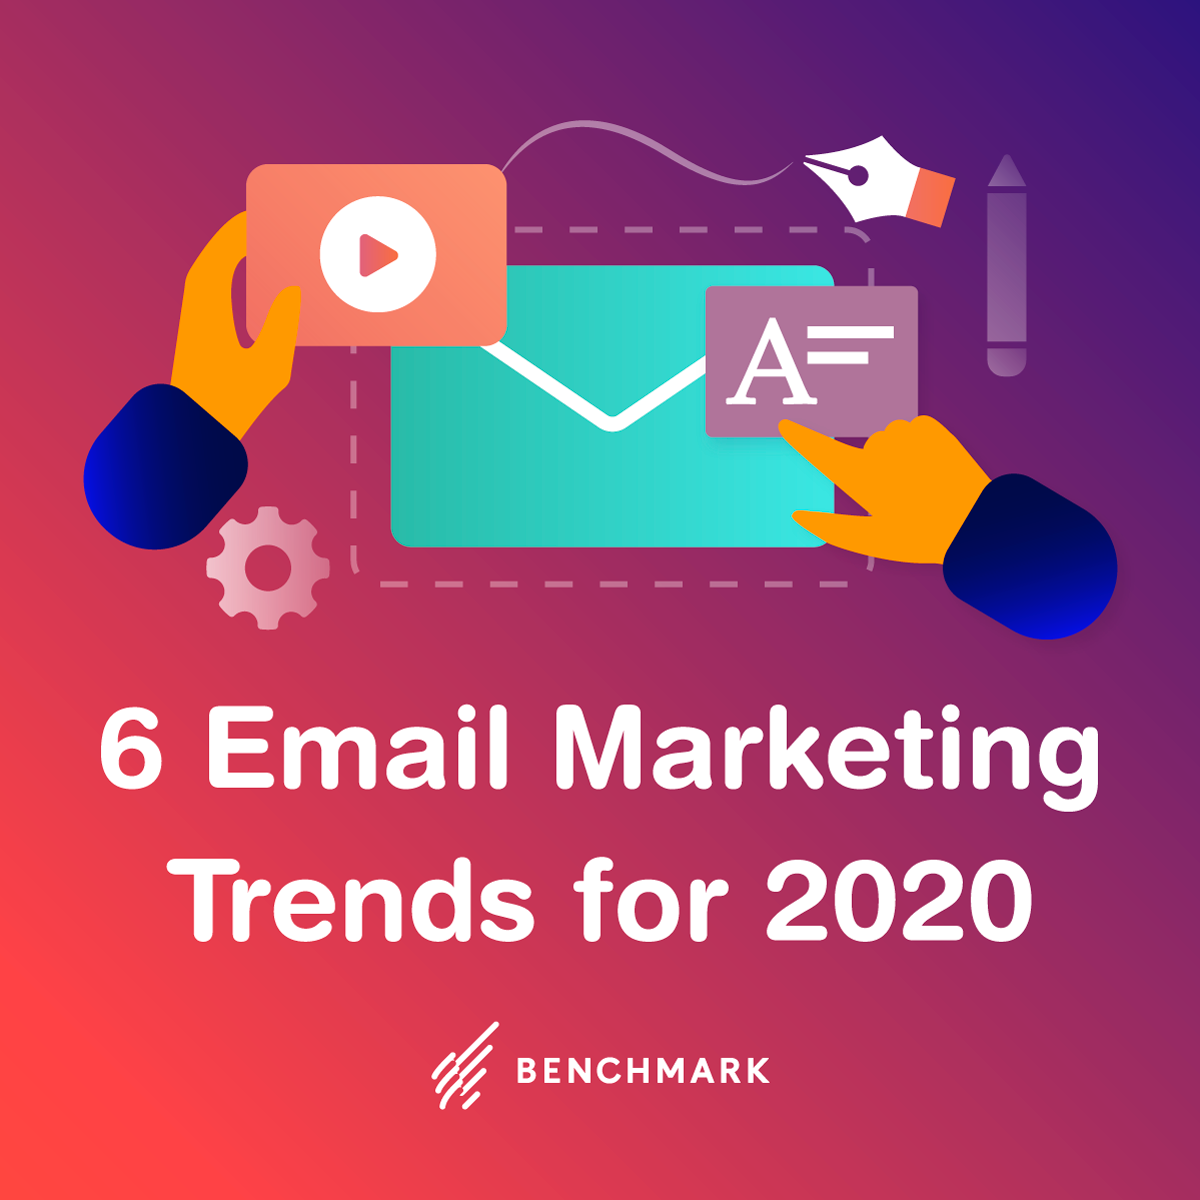 6 Email Marketing Trends for 2020